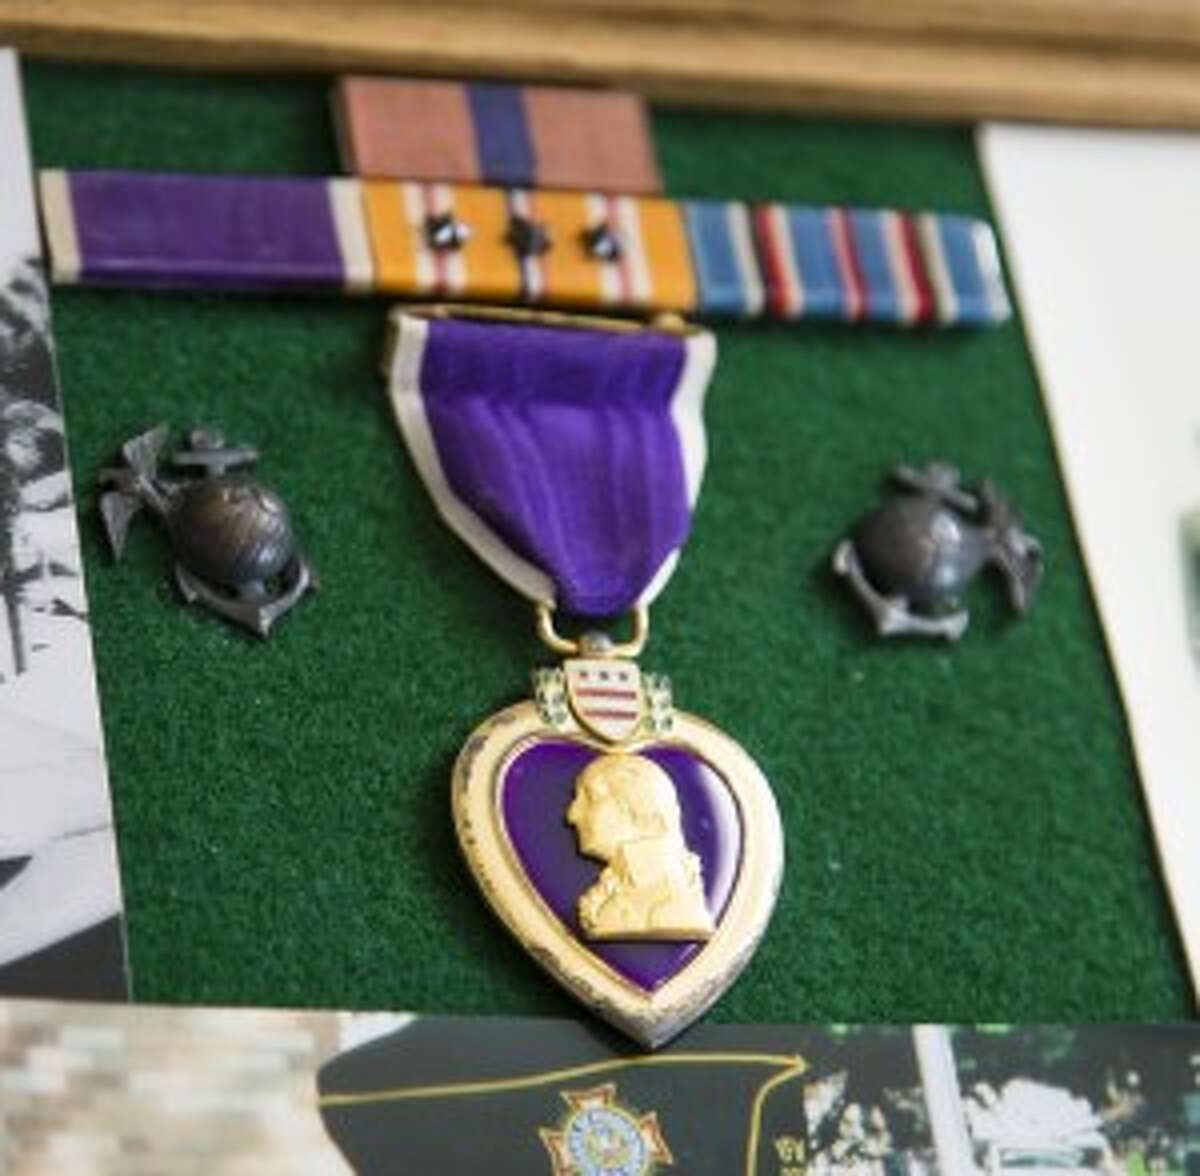 MEDAL: St. Onge served for four years overseas, earning a Purple Heart for his injury in Bougainville, an island in Papua New Guinea.